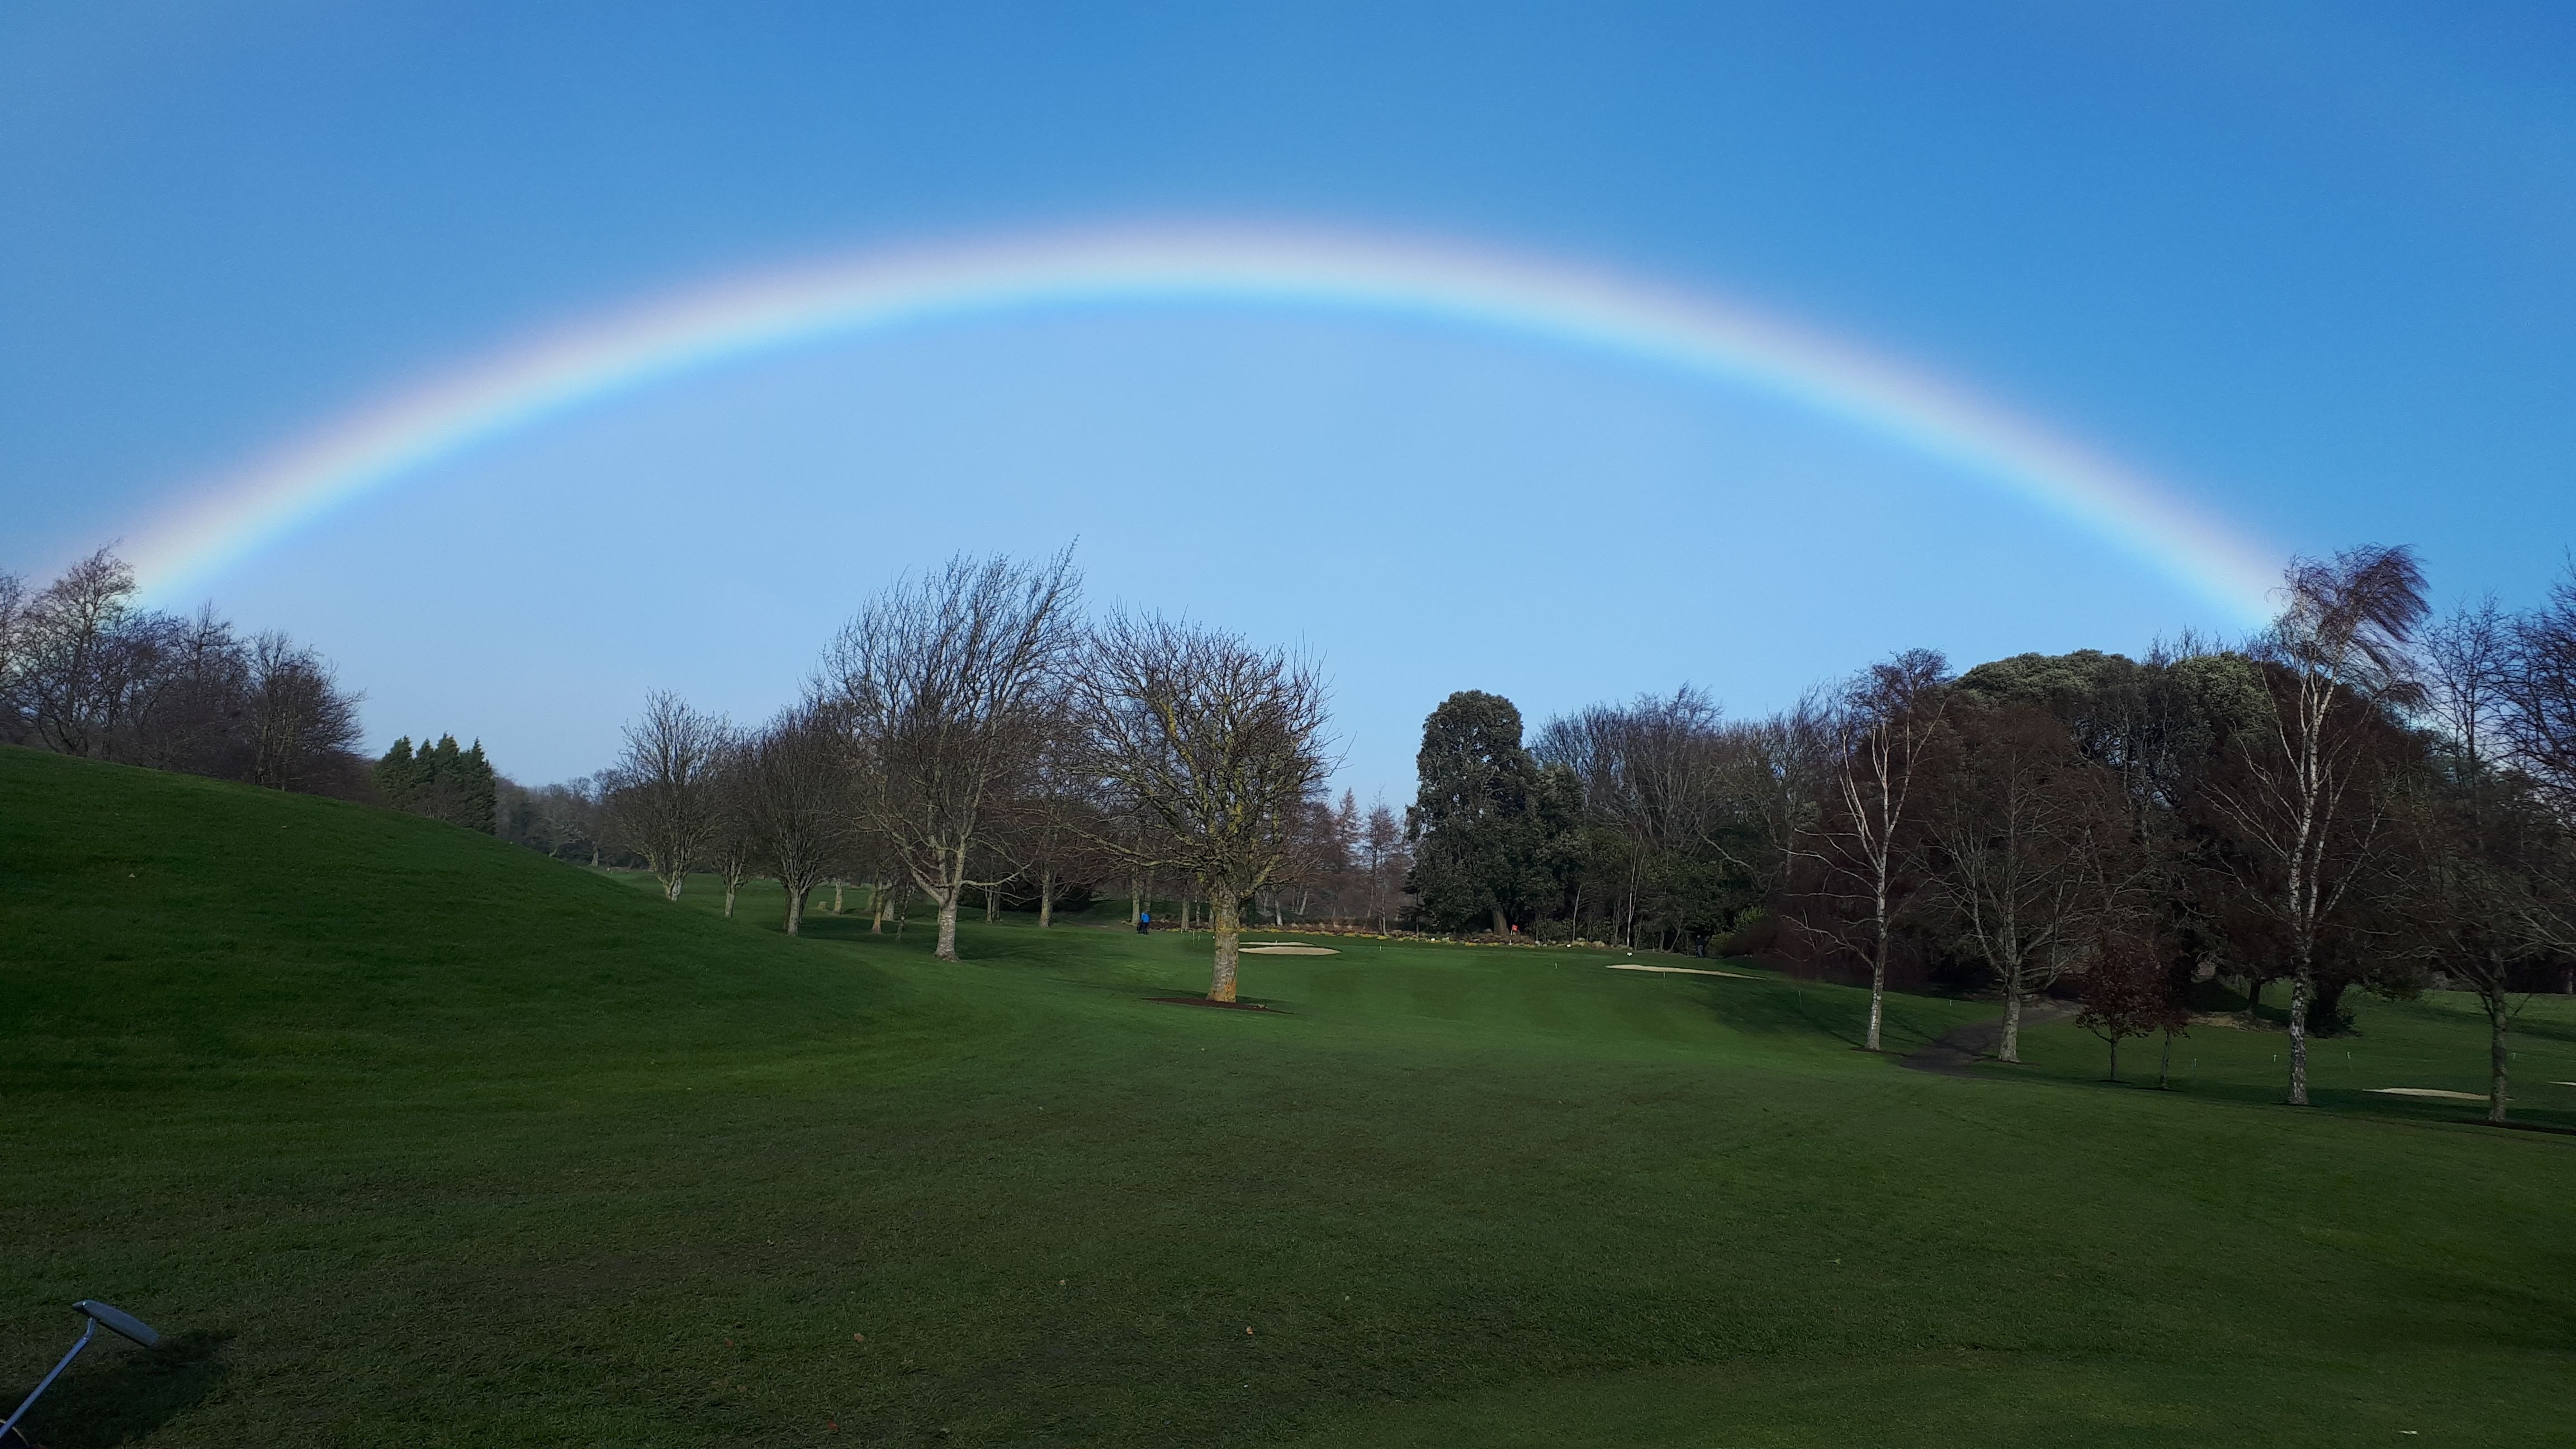  Eoin O'Siochru's - Photo of a rainbow over the17th -1st Feb 2020